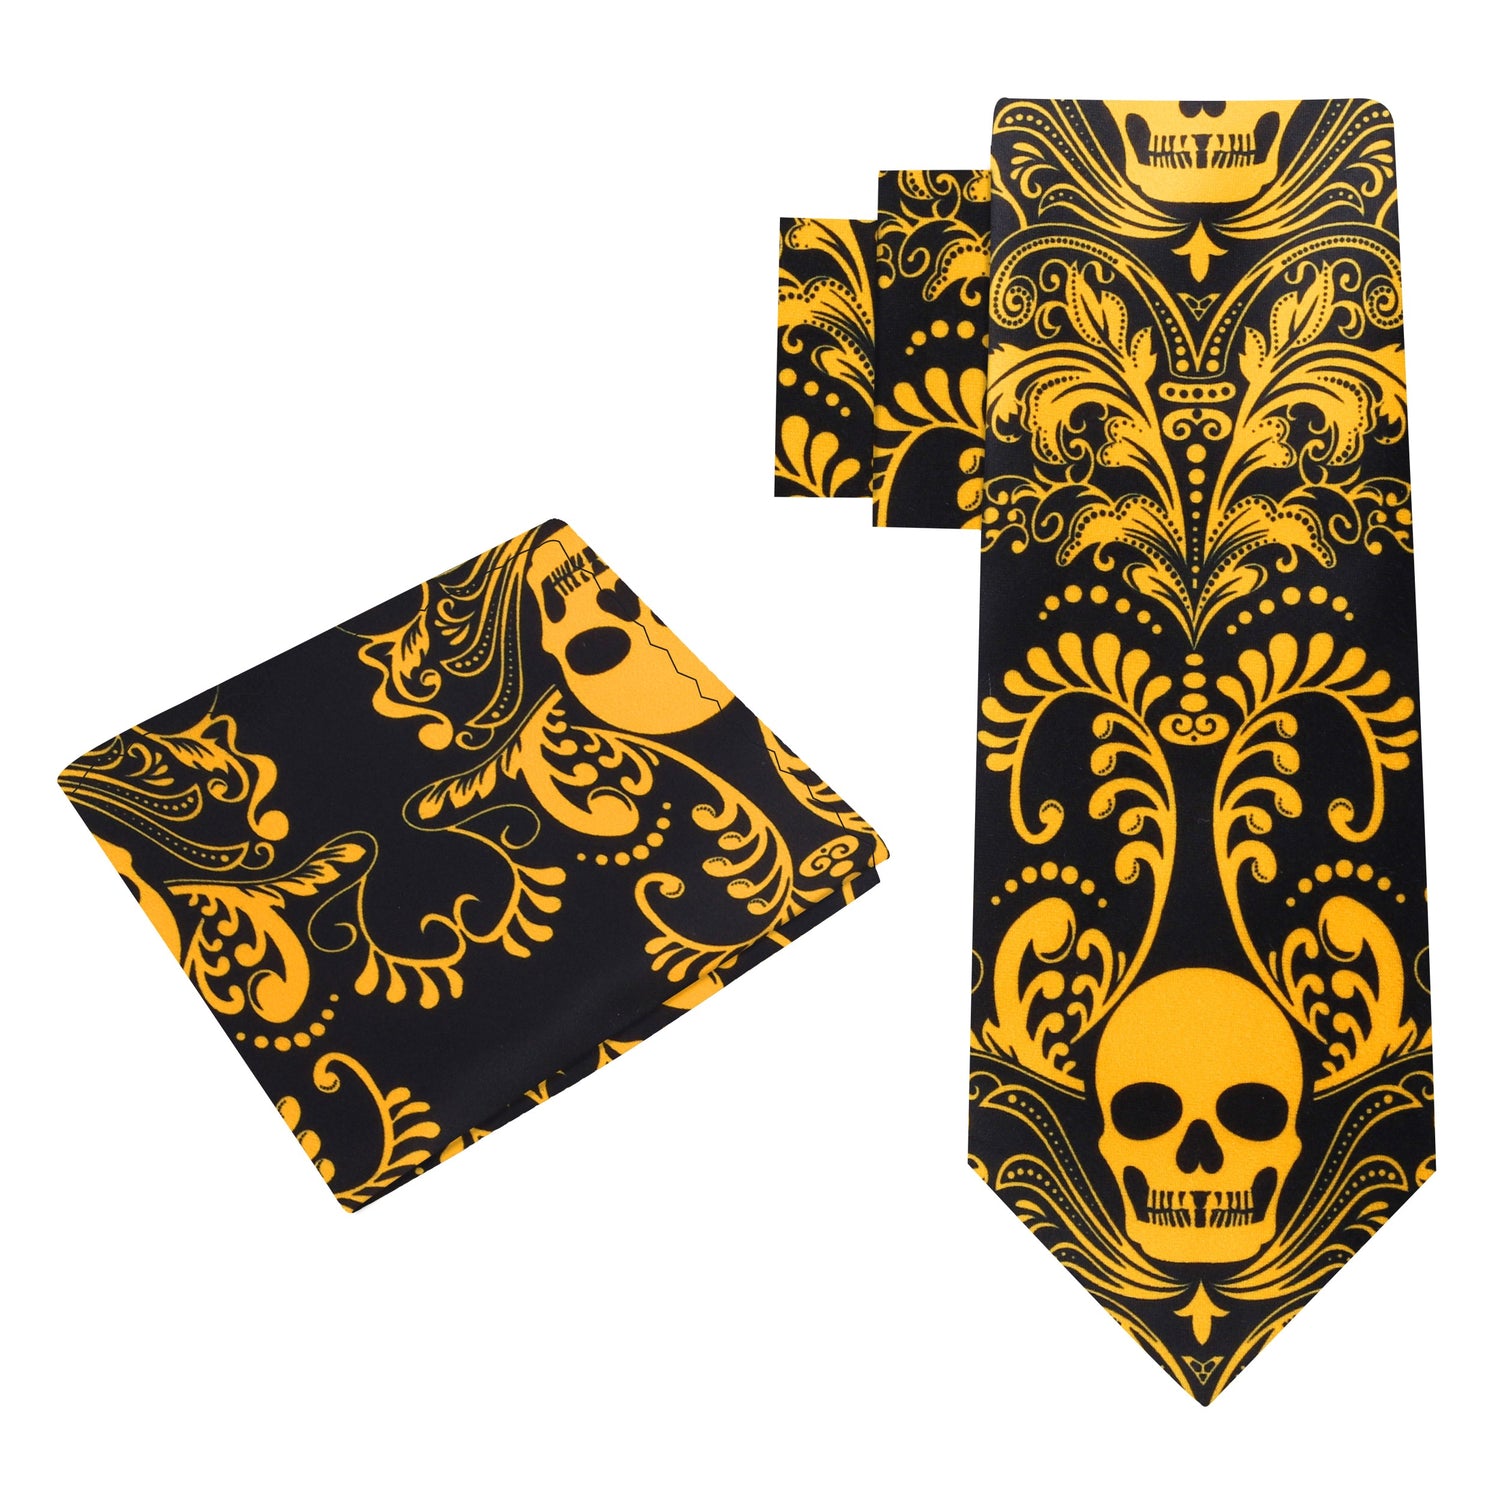 Alt View: Black and Yellow Gold Intricate Skull Tie and Pocket Square